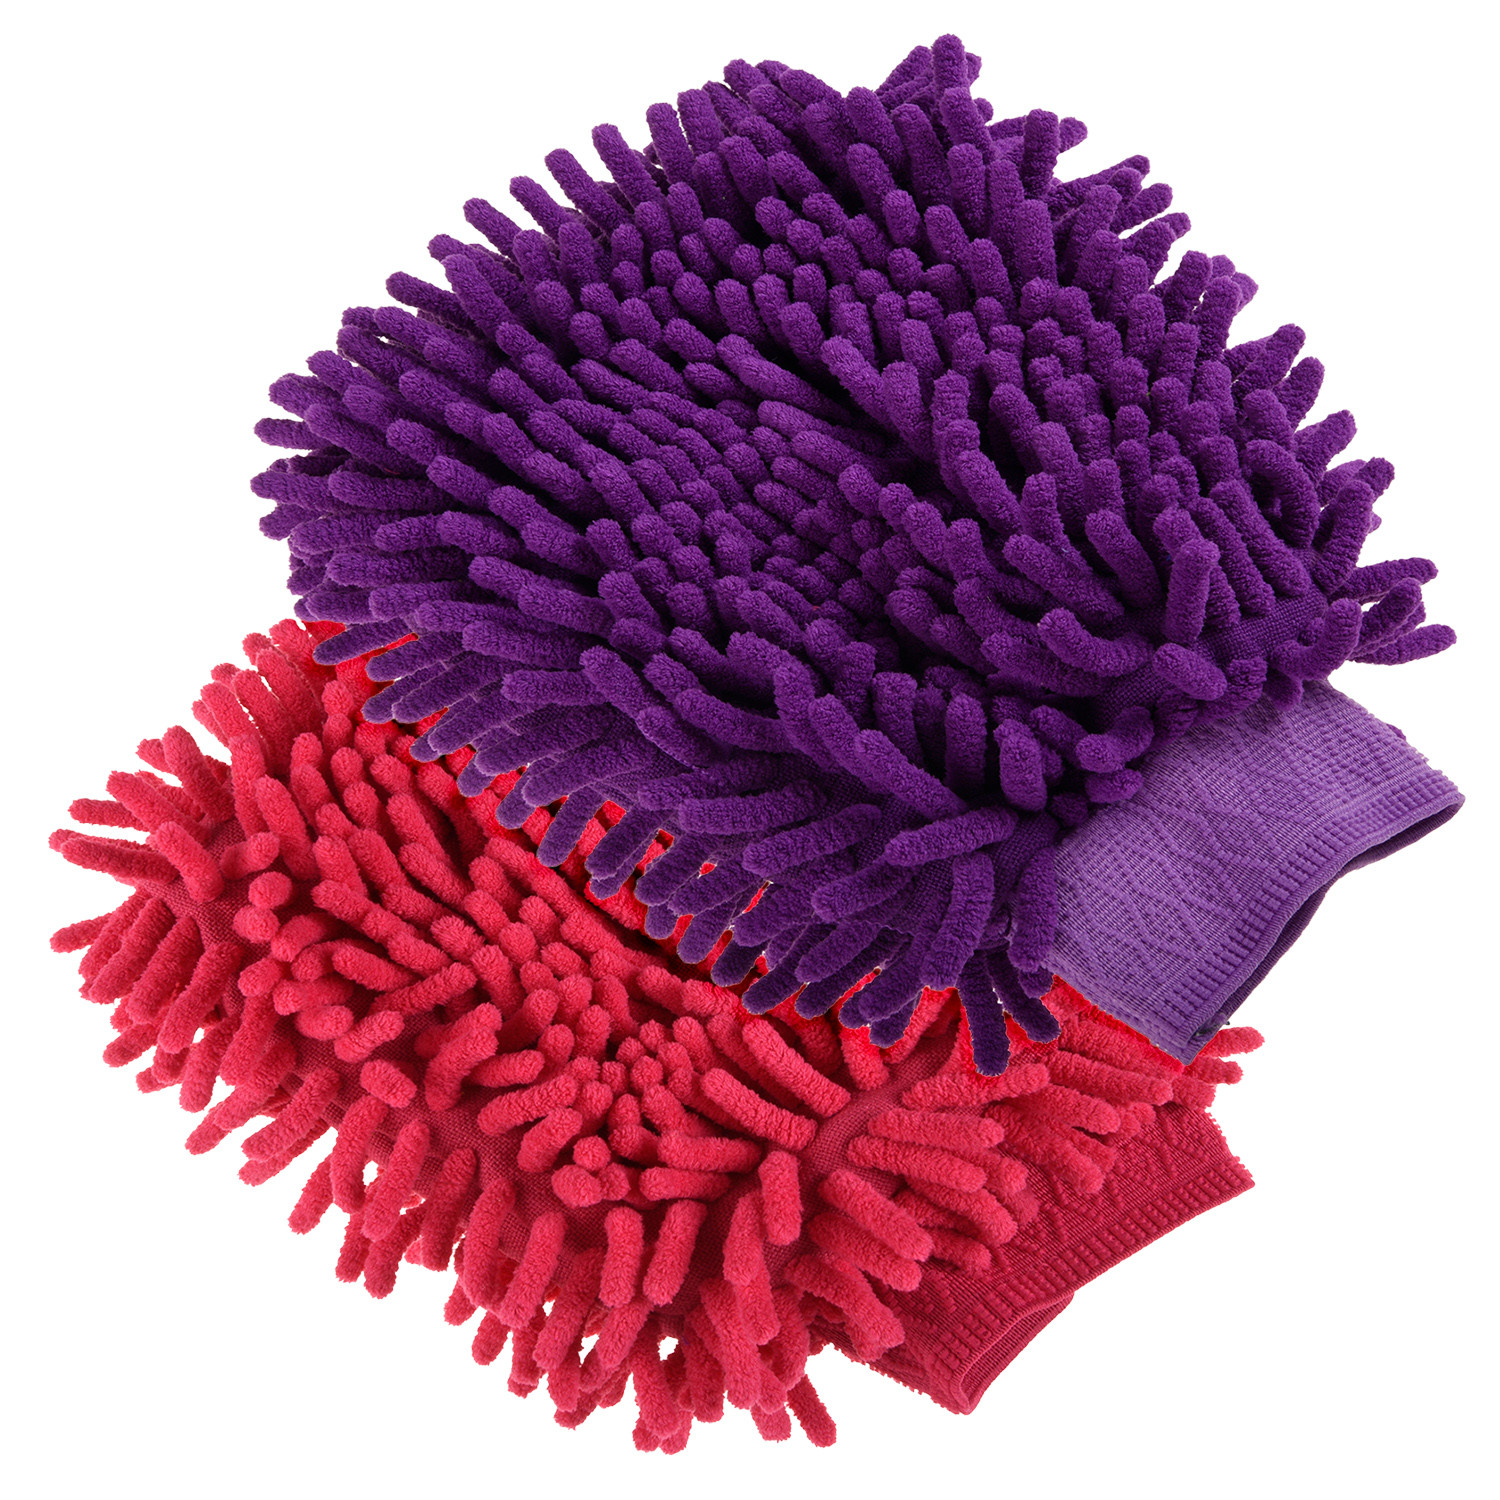 Kuber Industries Chenille Mitts|Microfiber Cleaning Gloves|Inside Waterproof Cloth Gloves|100 Gram Weighted Hand Duster|Chenille Gloves For Car|Glass|Pack of 2 (Purple & Dark Pink)